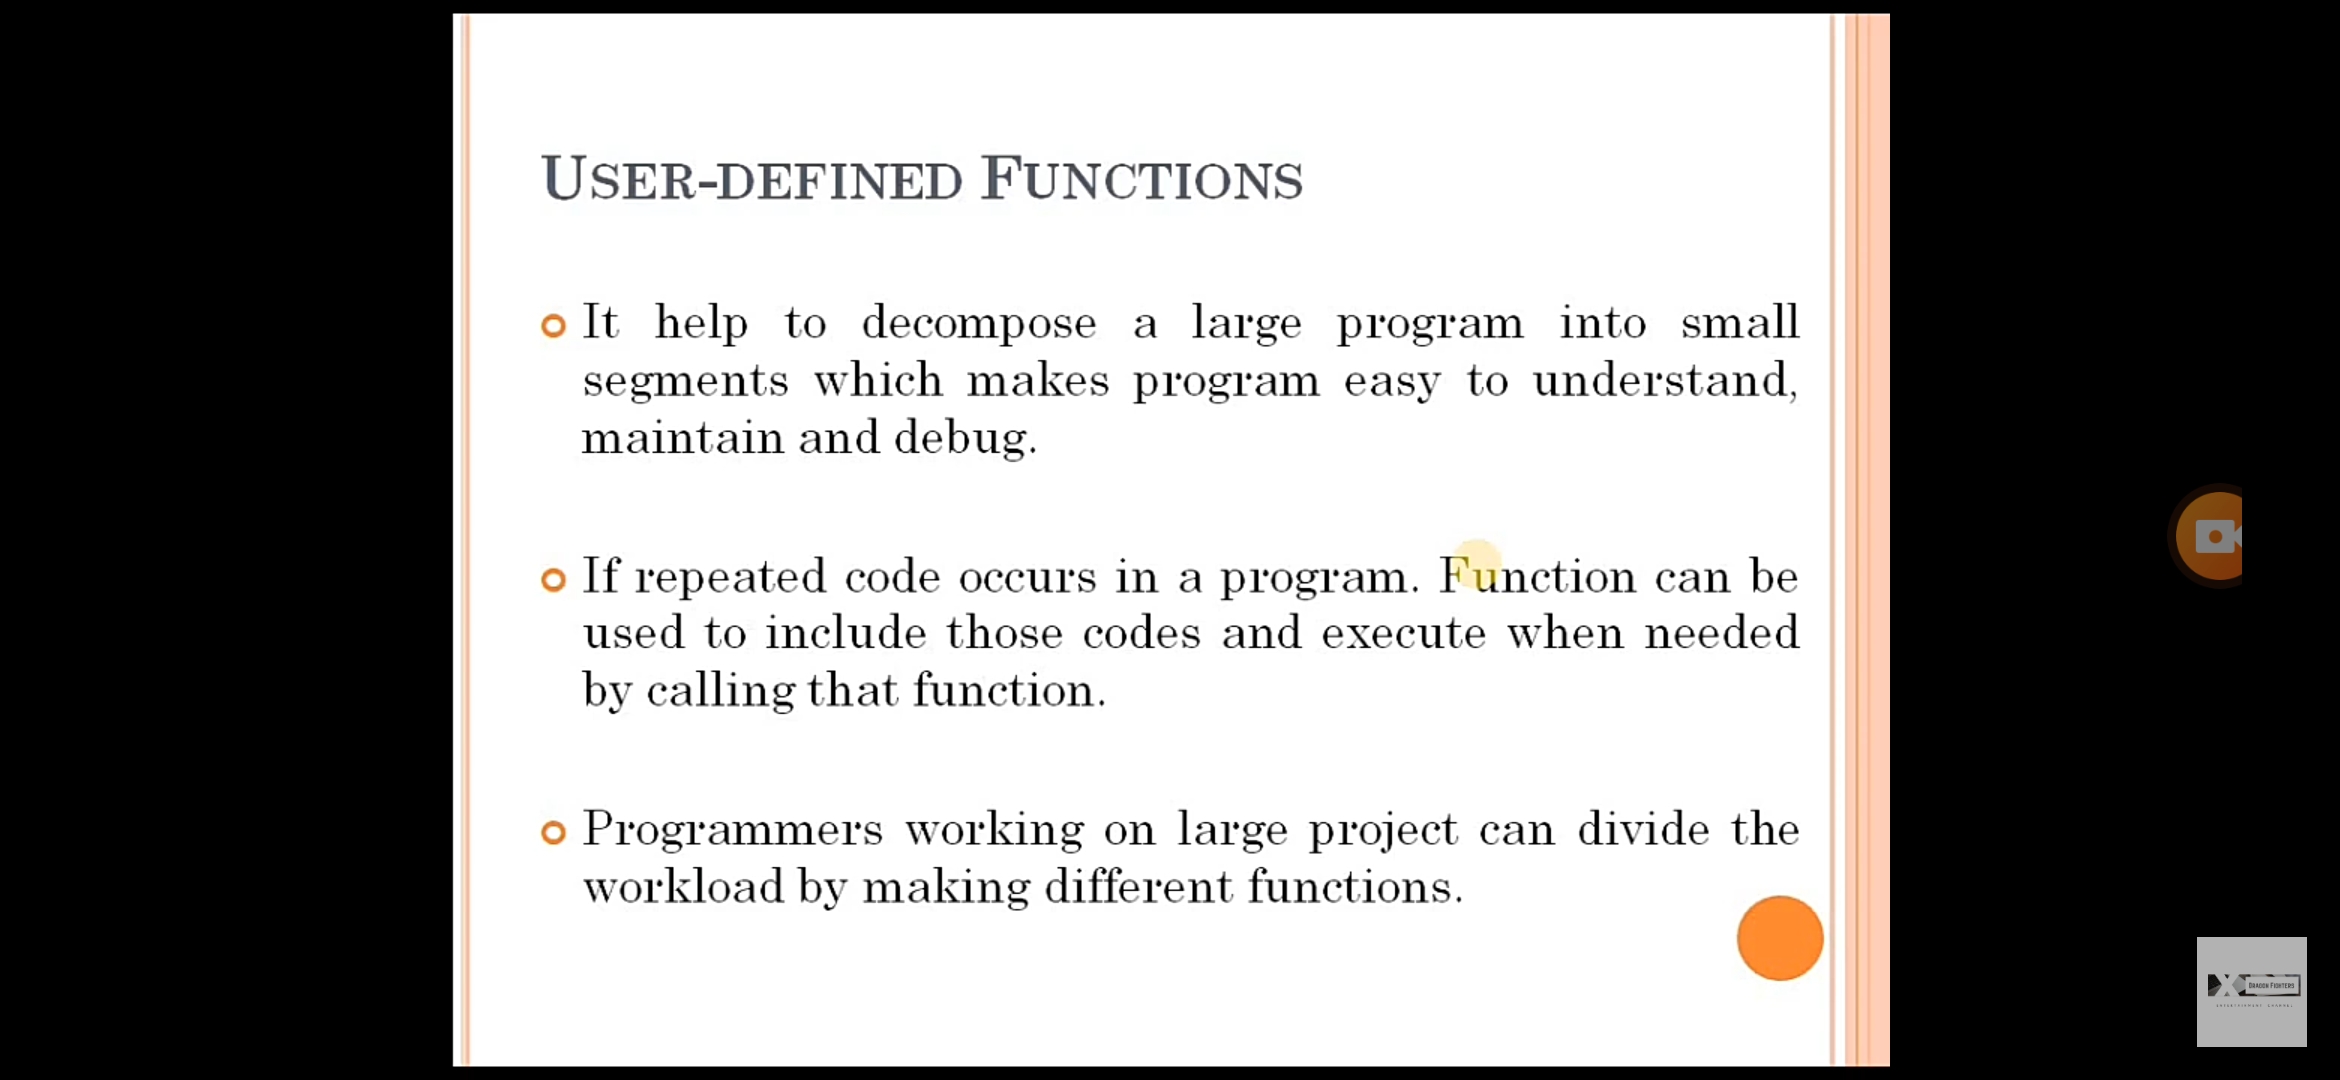 give a presentation on advantages of user defined functions